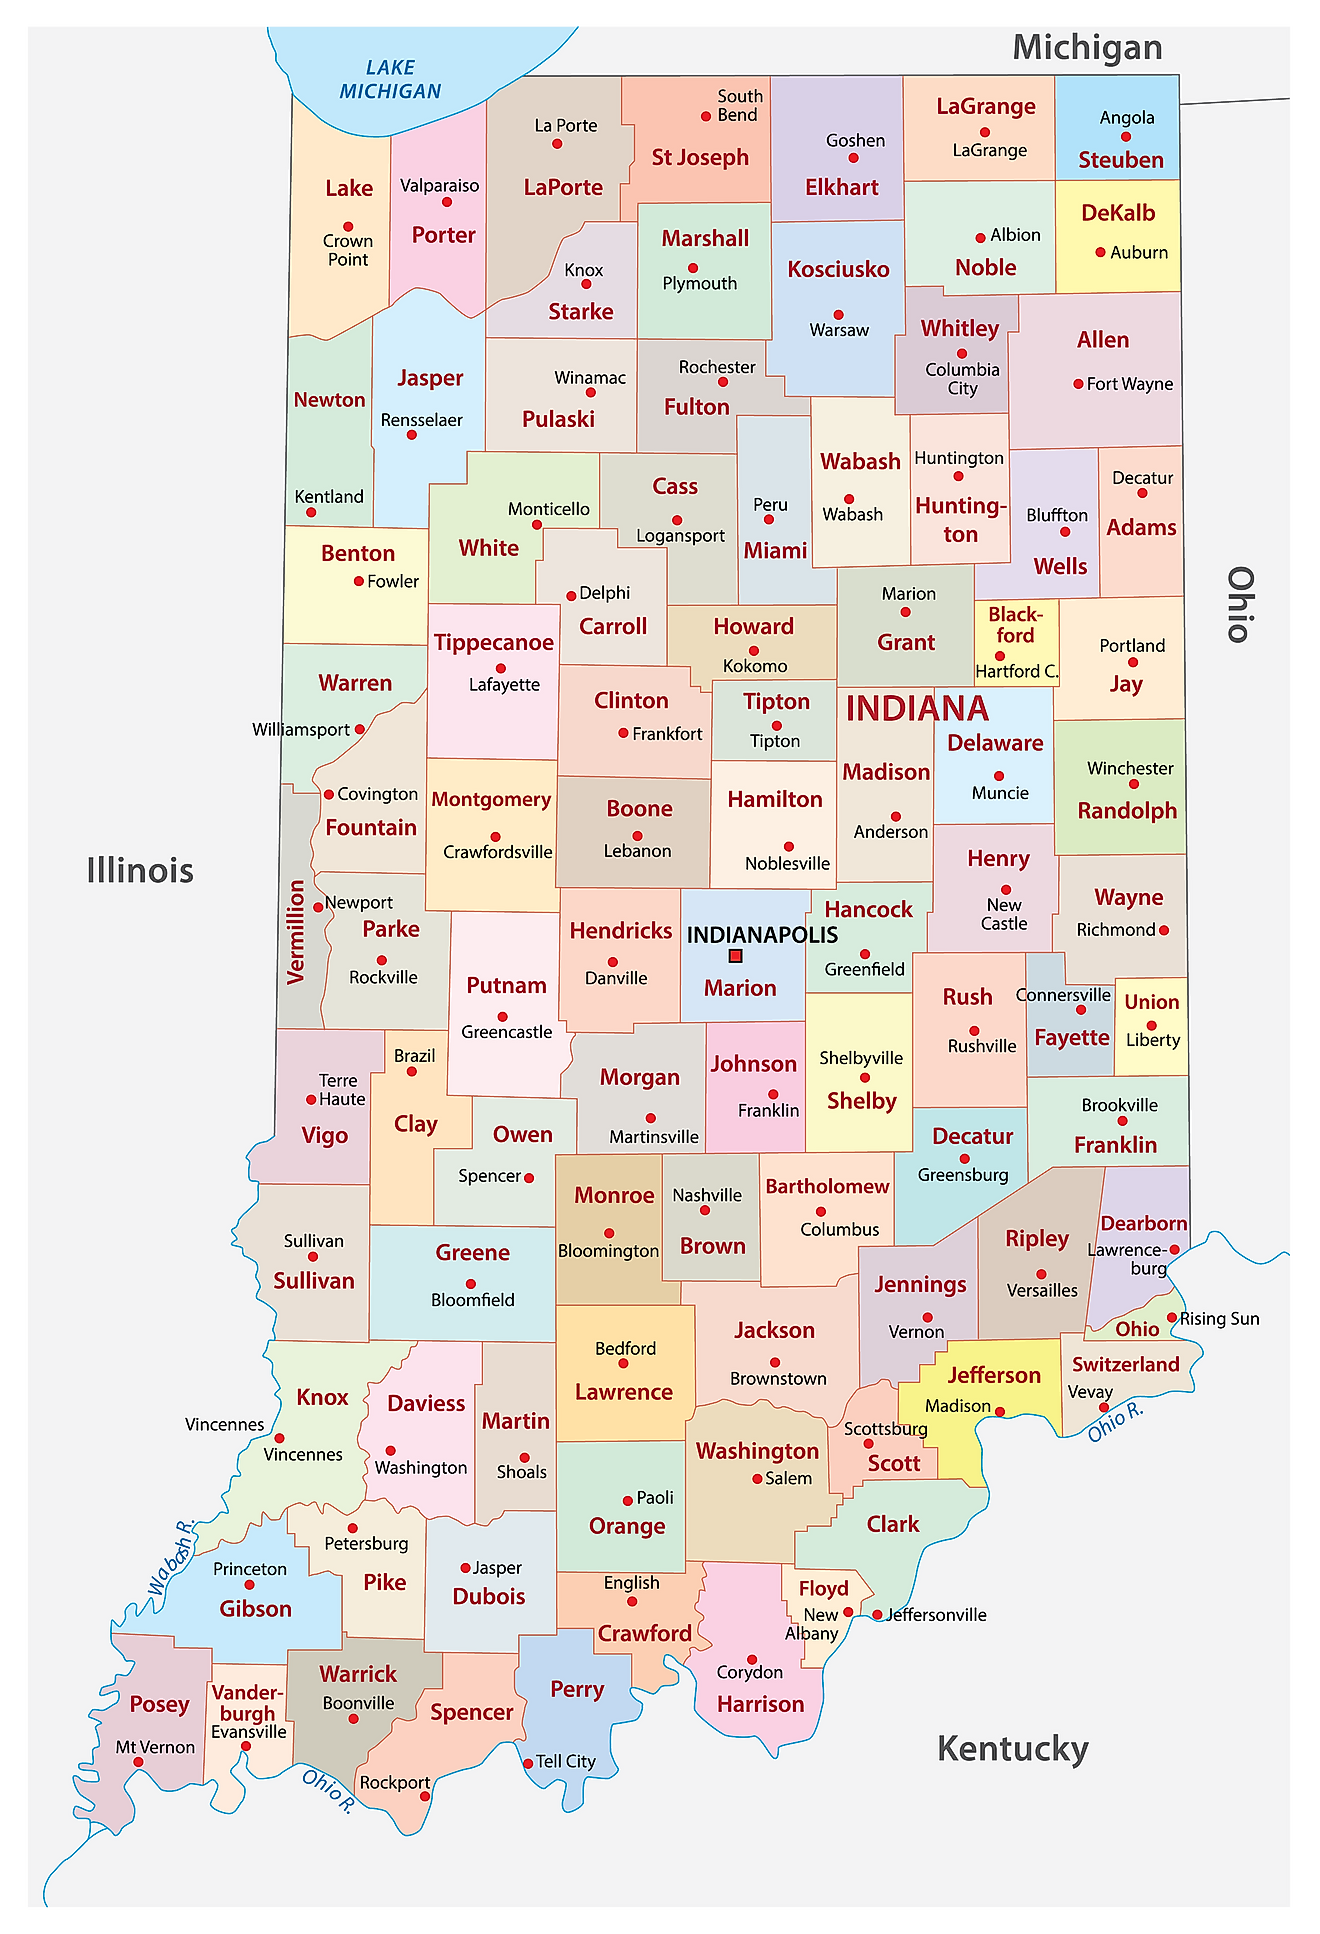 Administrative Map of Indiana showing its 92 counties and the capital city - Indianapolis